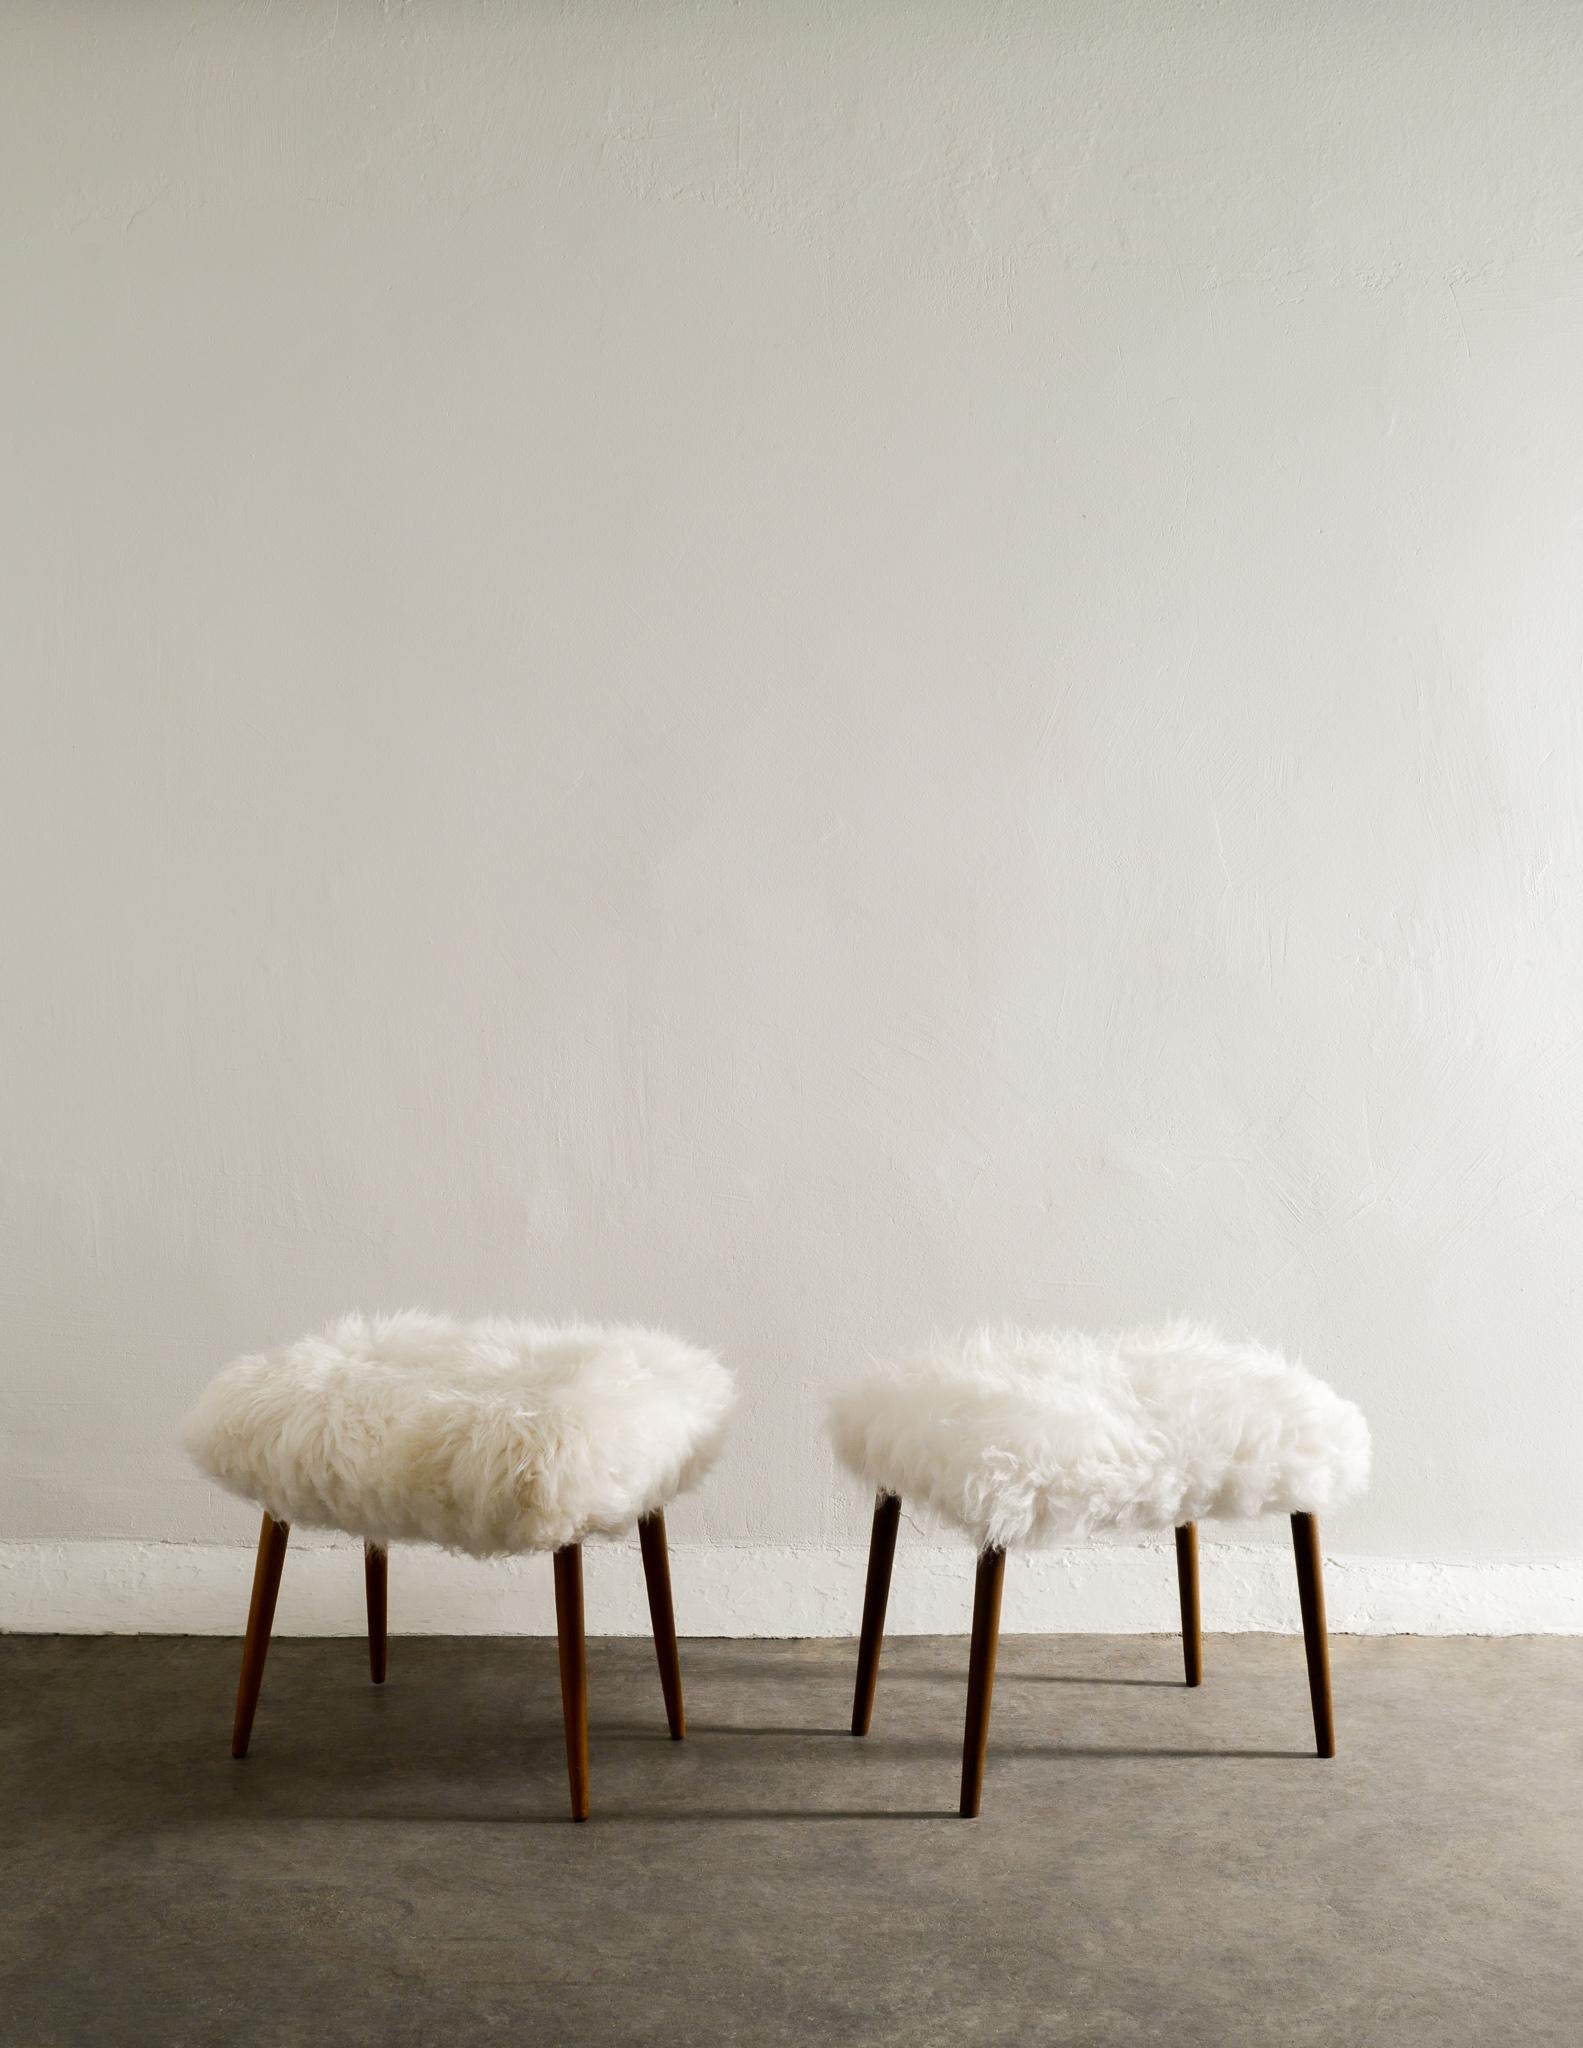 Rare pair of Swedish stools in beech newly upholstered in white fluffy sheepskin. In good vintage condition with minimal signs of use. Sold as a pair. 

Dimensions: H: 43 cm W: 56 cm D: 40 cm.